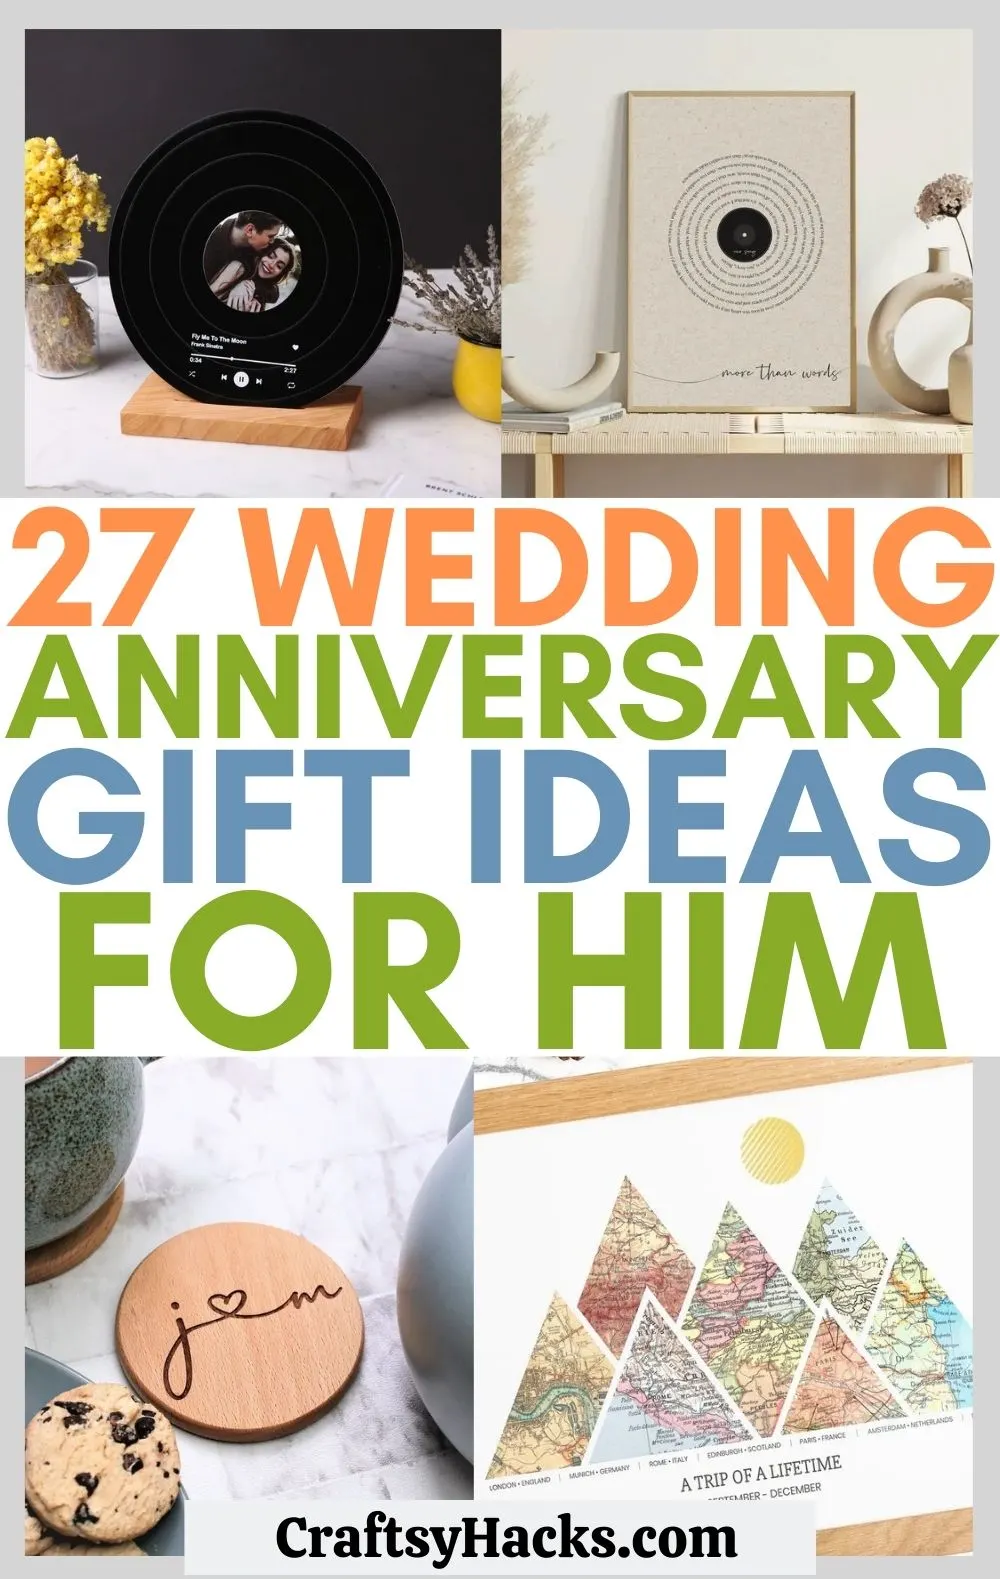 57 Best 33rd Anniversary Gift Ideas For Him, Her and Couples